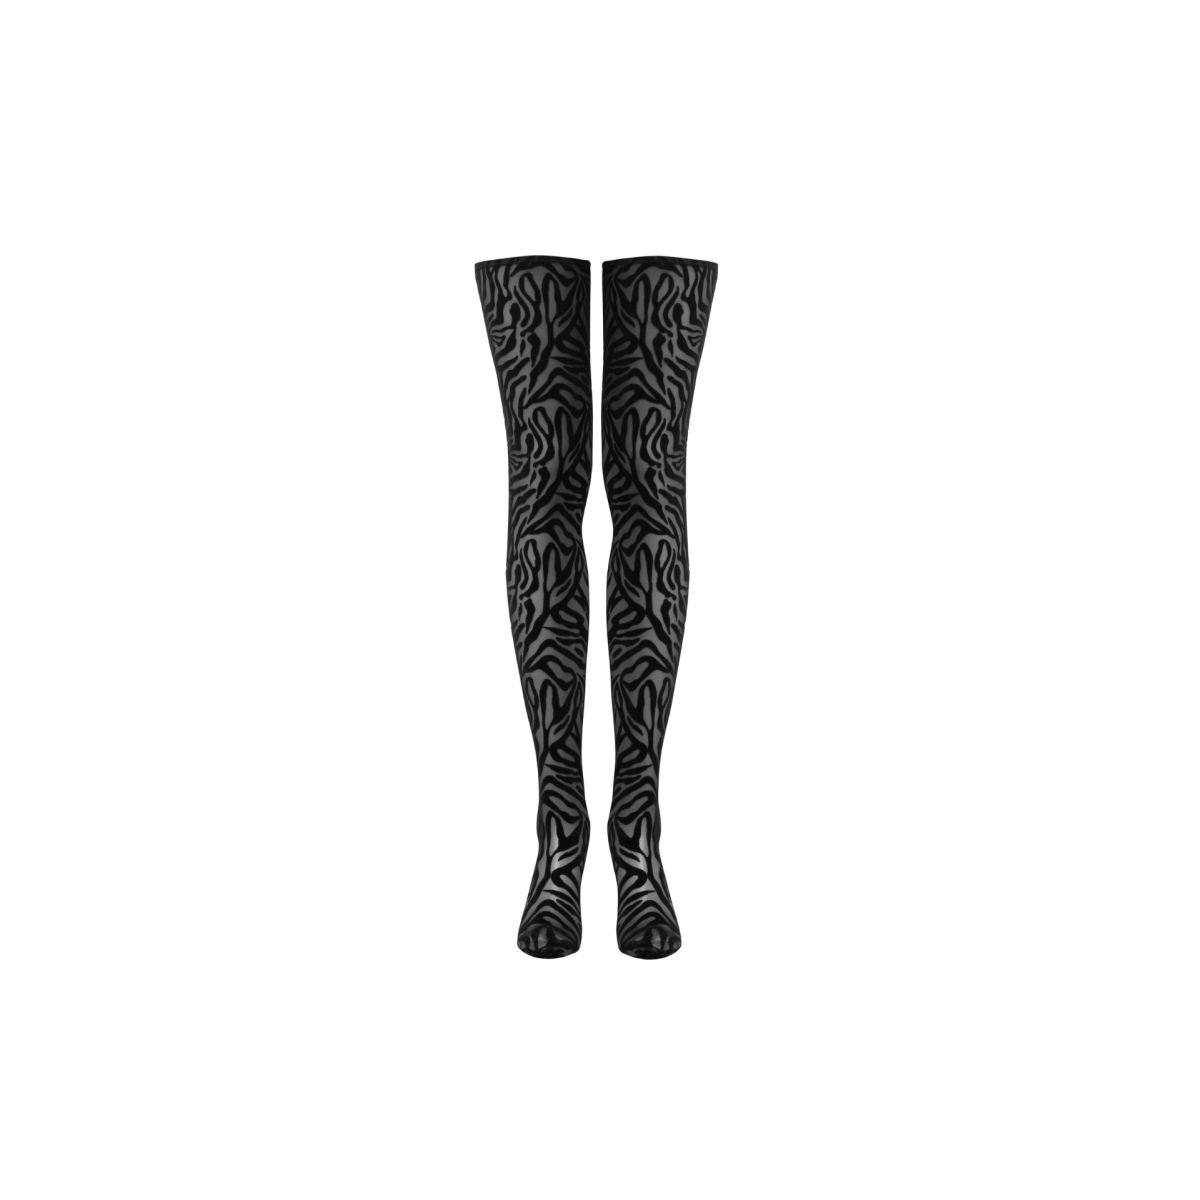 Wanted Stockings | Wolf & Badger (US)